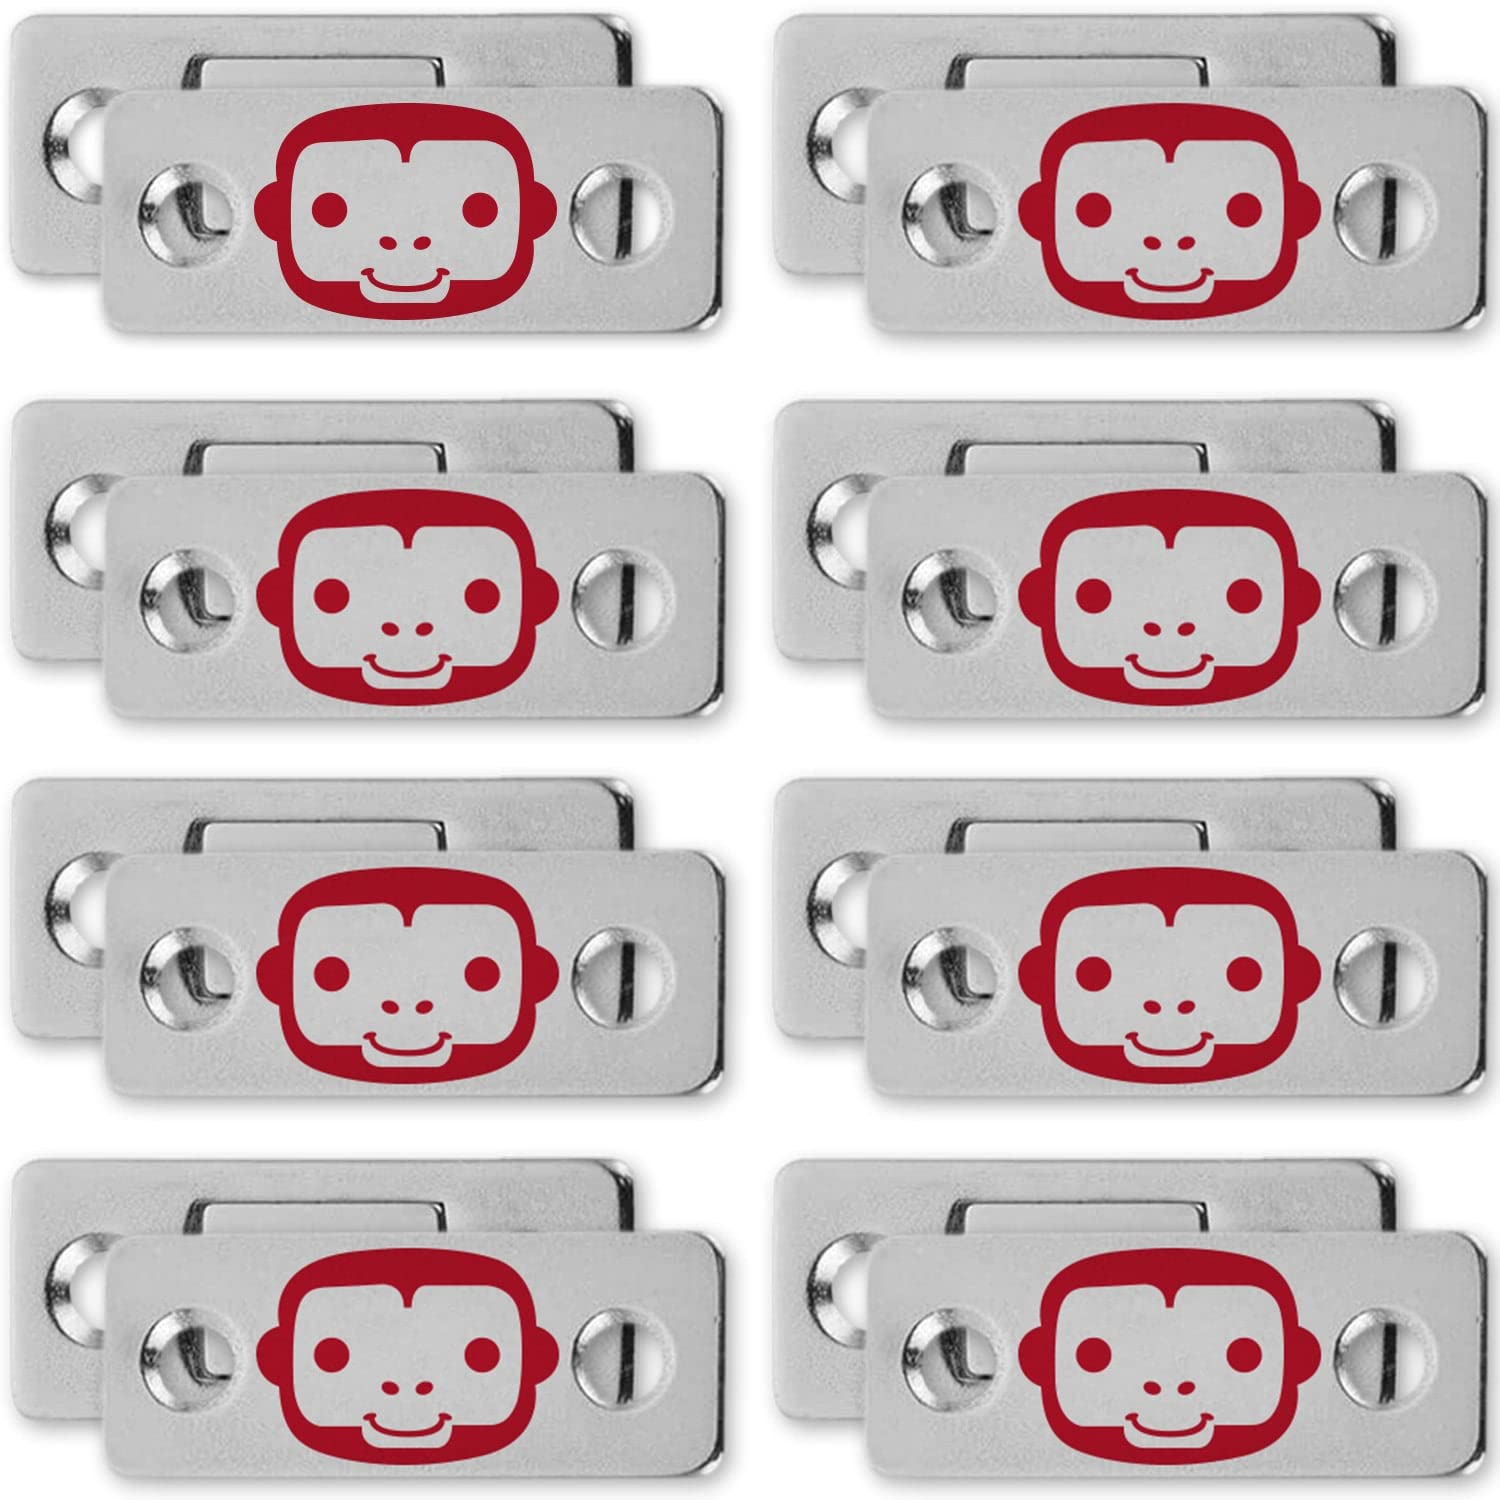 RUBY Monkey Magnets AS-SEEN-ON-TV, Ultra-Thin Magnetic Plates Keep It All Shut, Fast and Easy Installation, Just Peel & Stick, Slim Design Fits Virtually Anywhere, Cabinets, Drawers & More, 8 Sets